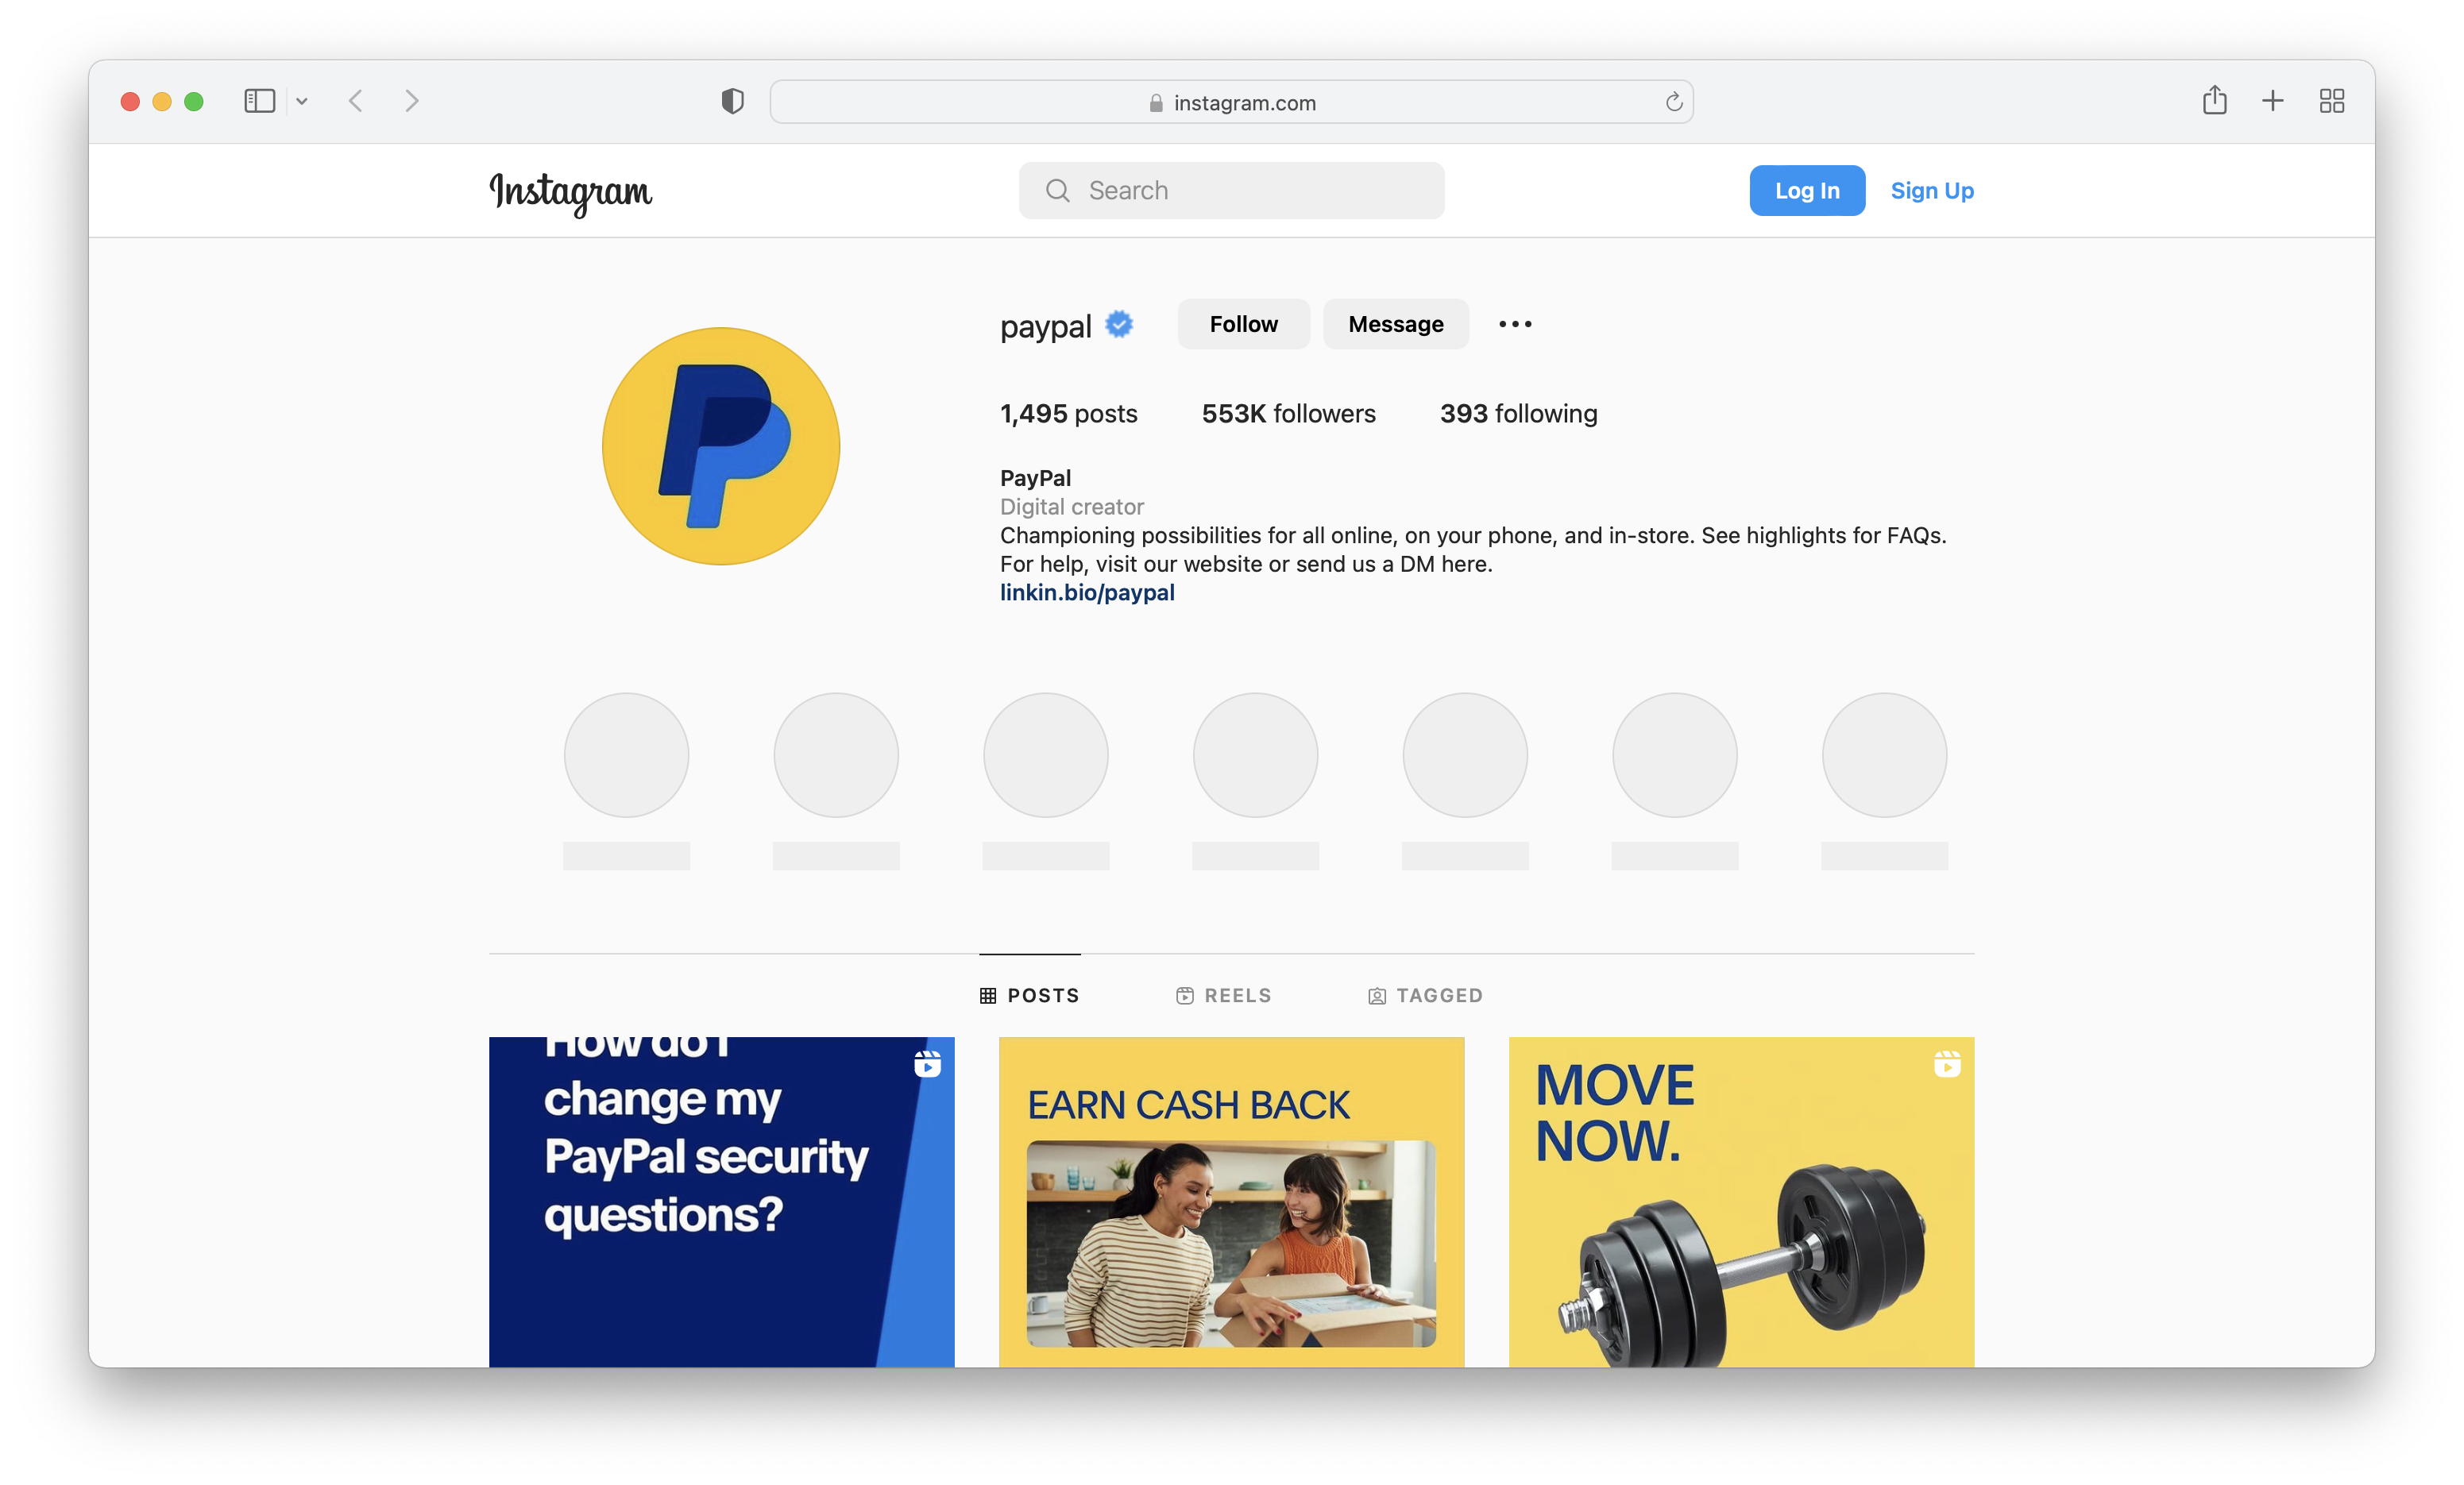 PayPal’s Instagram account